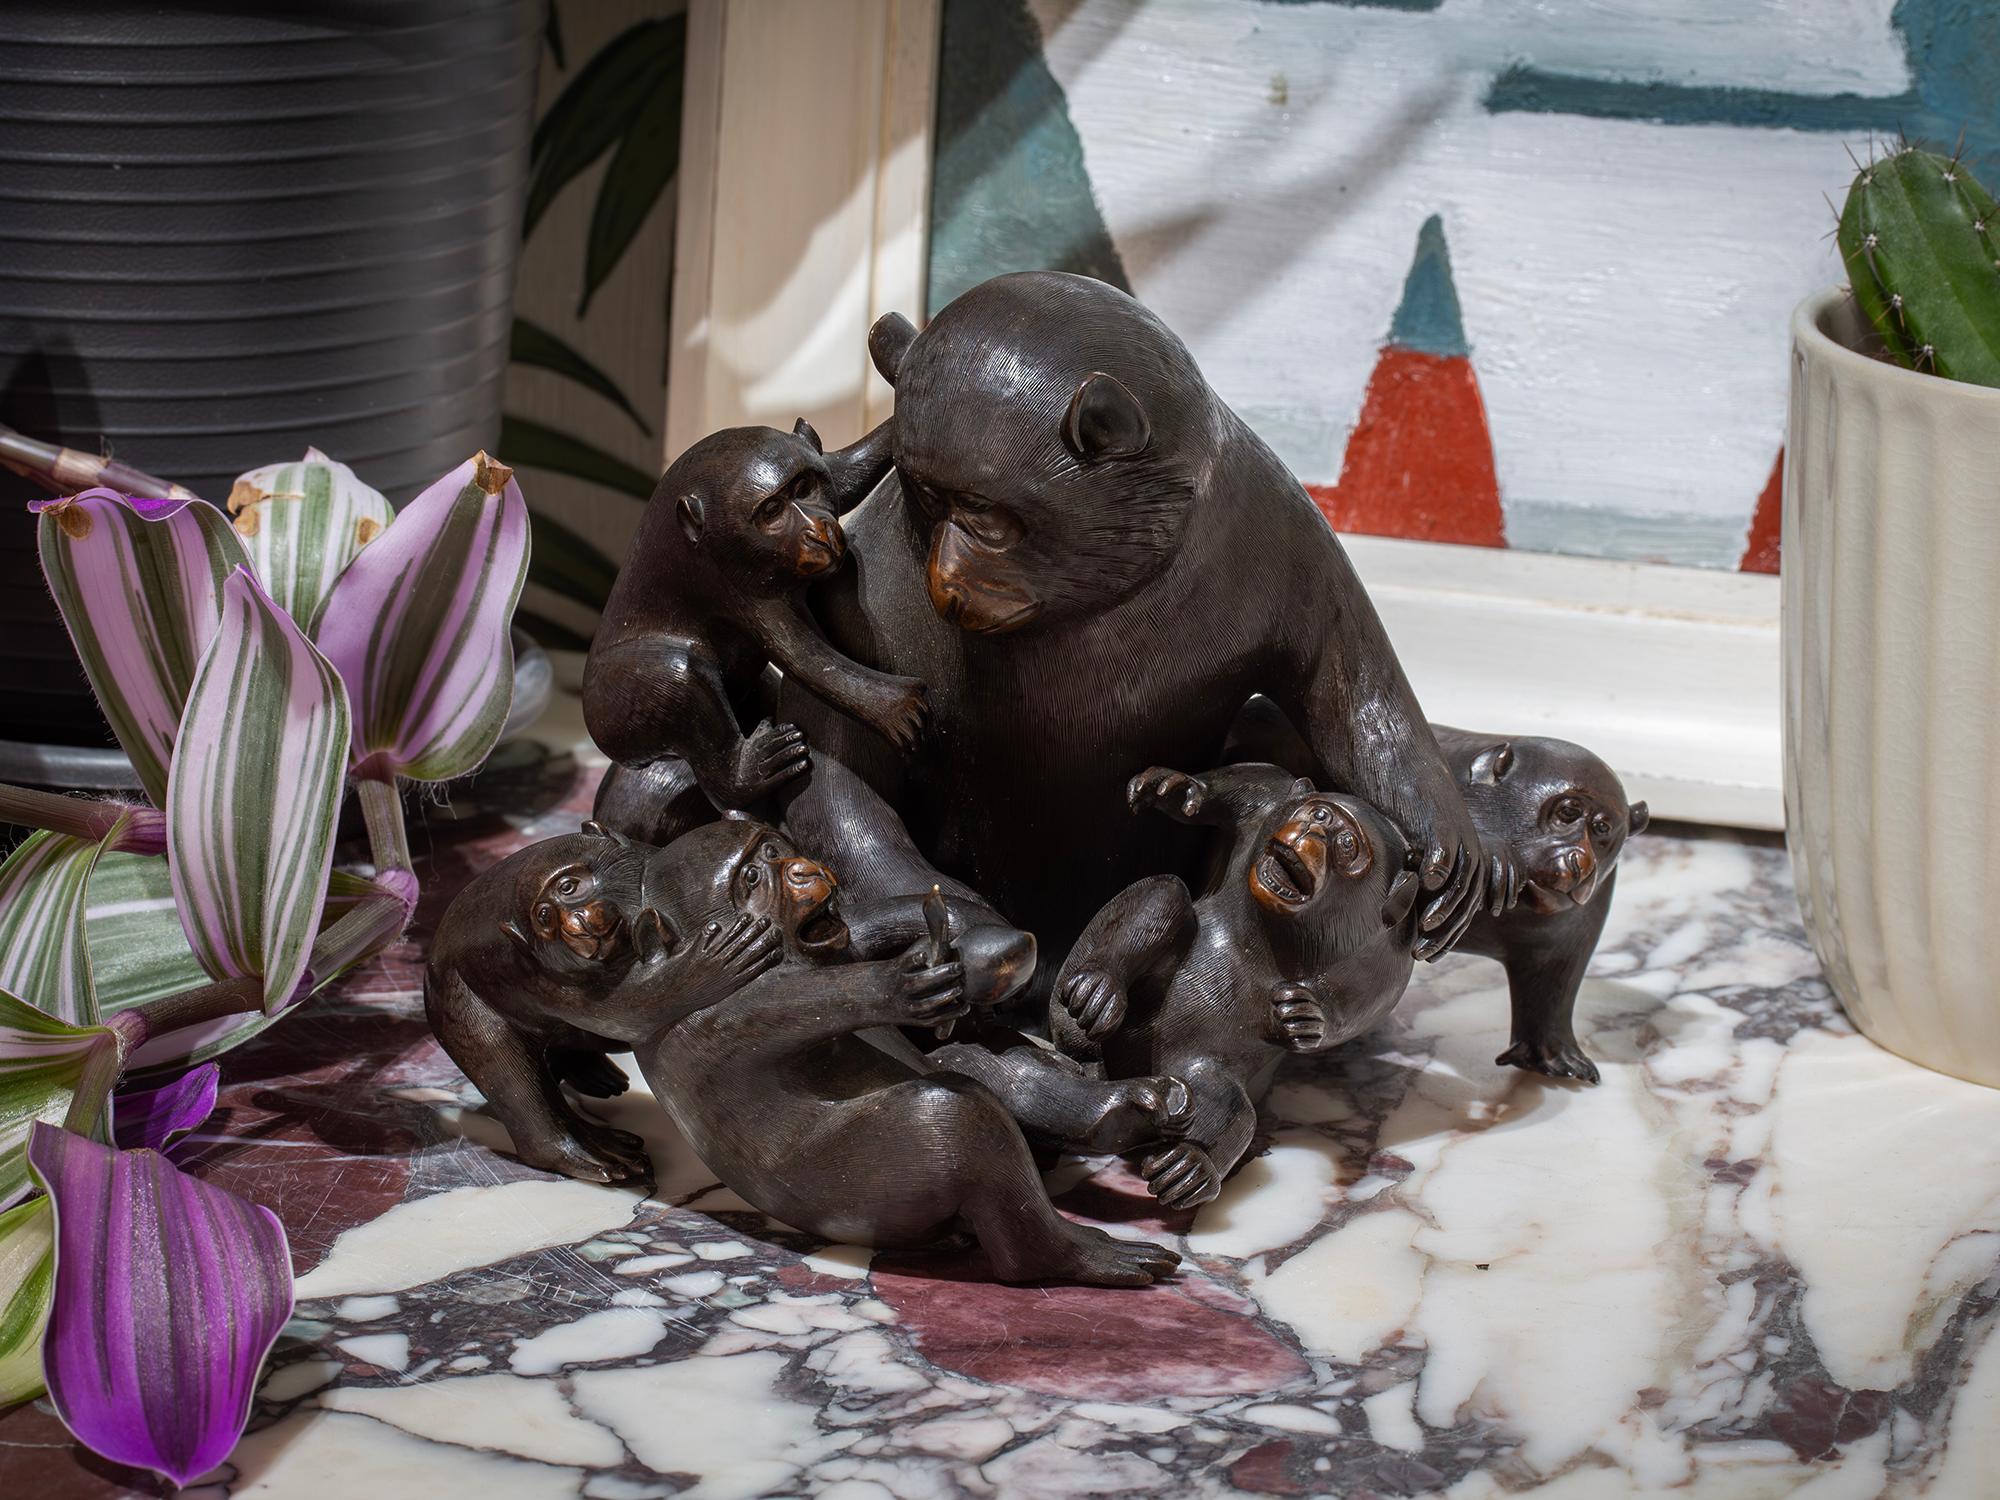 Featuring Seven Japanese Macaques Cast by Shosai 正齊鋳

Form our Japanese collection, we are delighted to offer this Japanese Bronze Monkey Group Okimono. The Japanese Monkey Group formed as a male father monkey and his infants playing around and